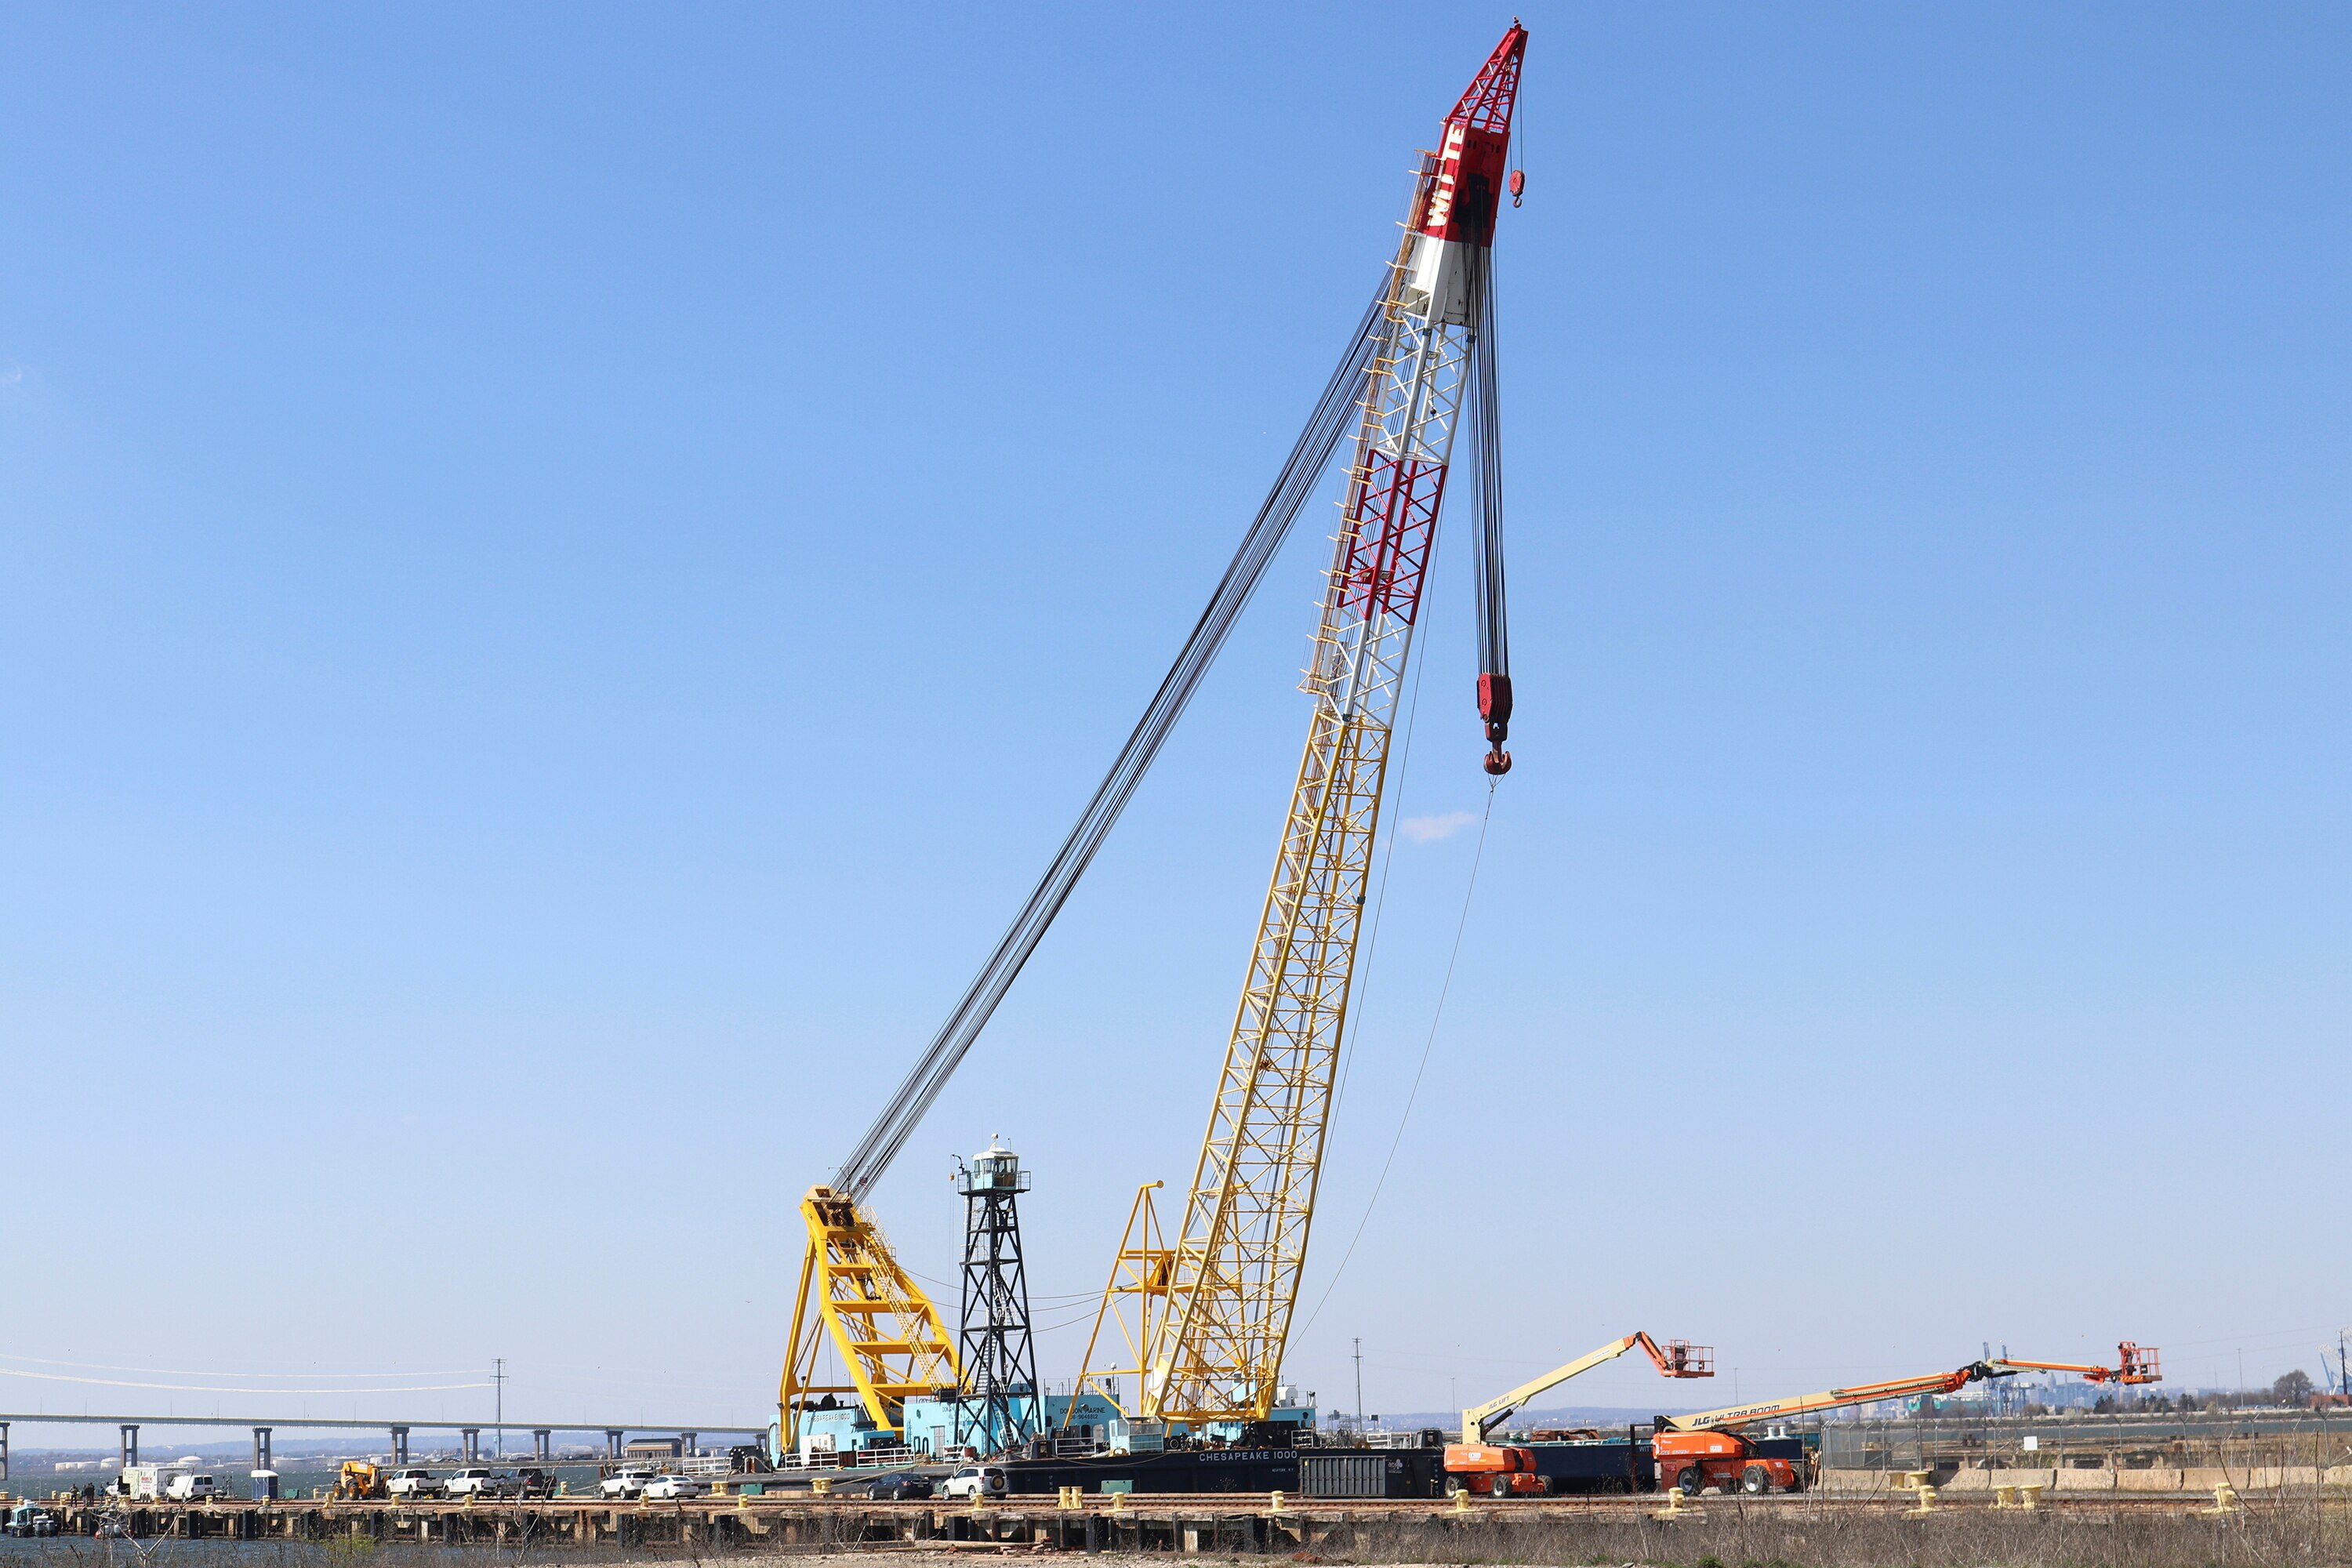 A large crane docked on land with a big blue sky above